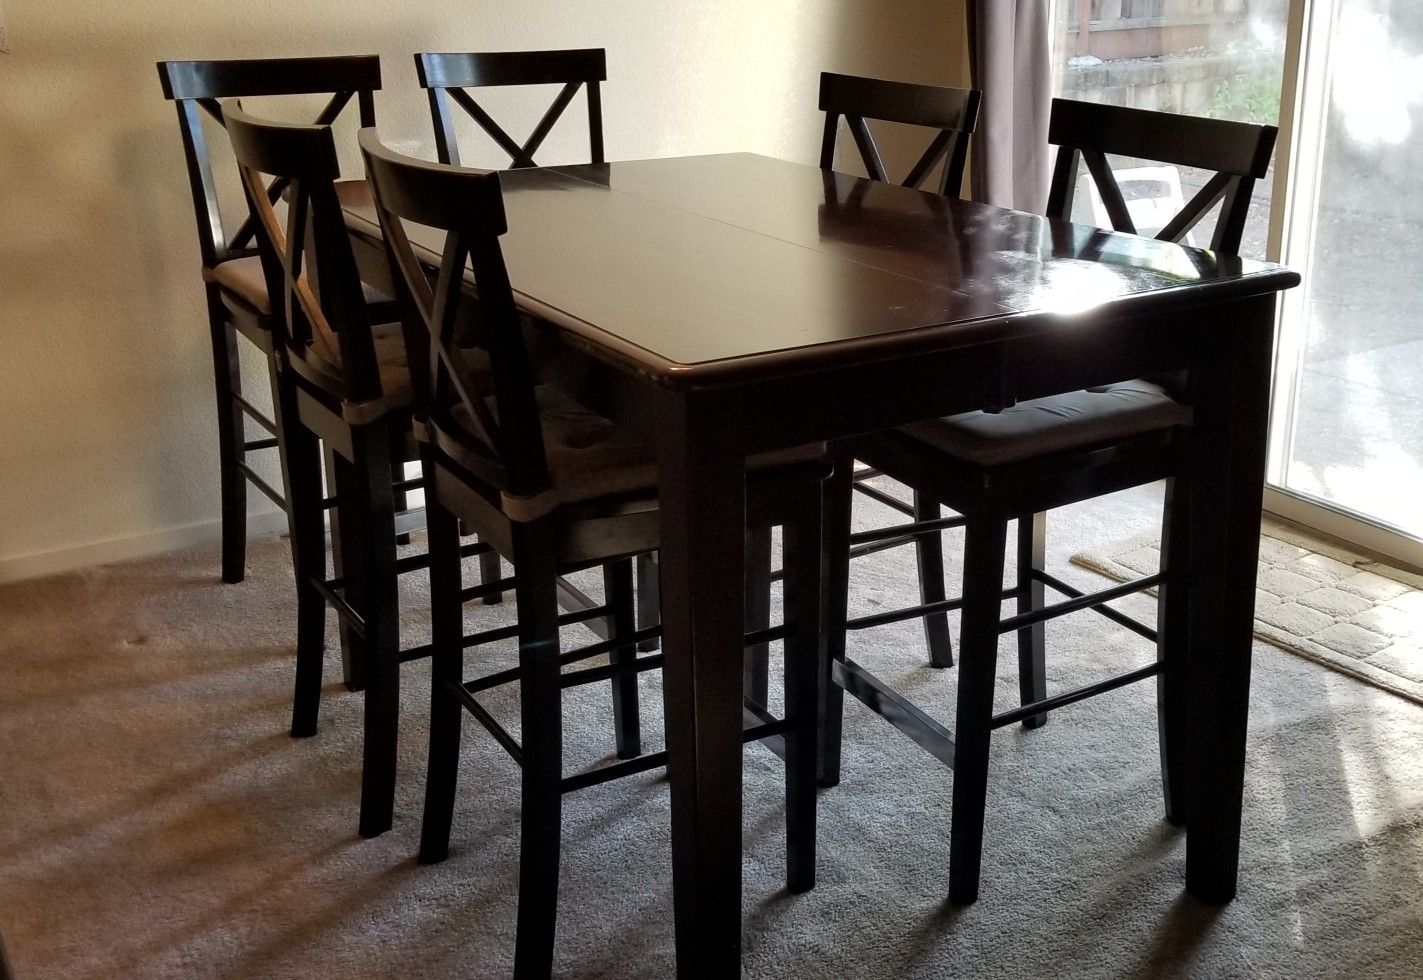 Counter height dining table set with hidden leaf